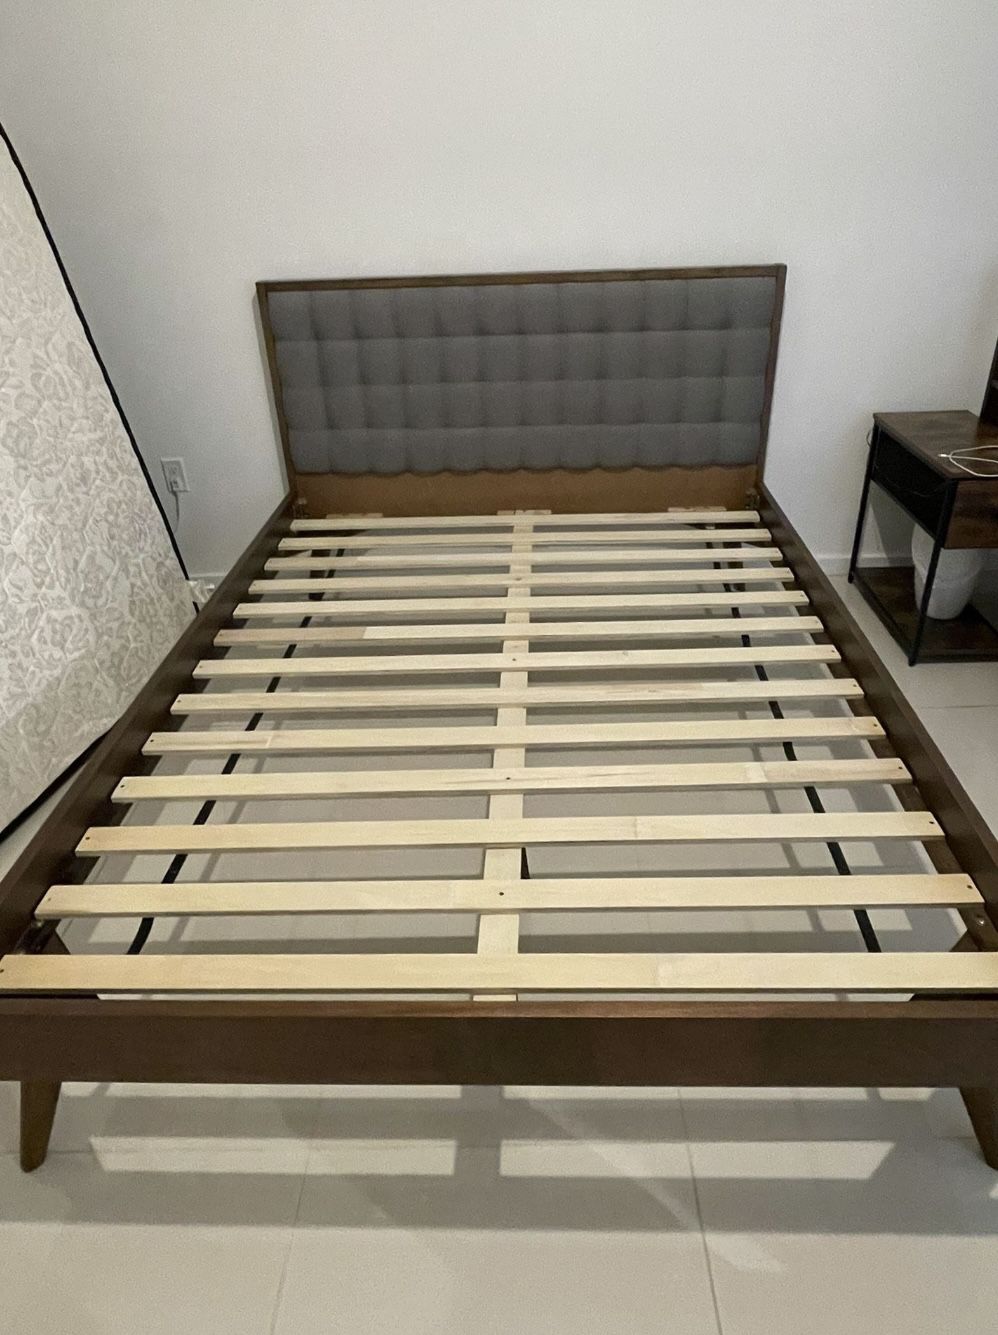 BED FRAME Queen Size